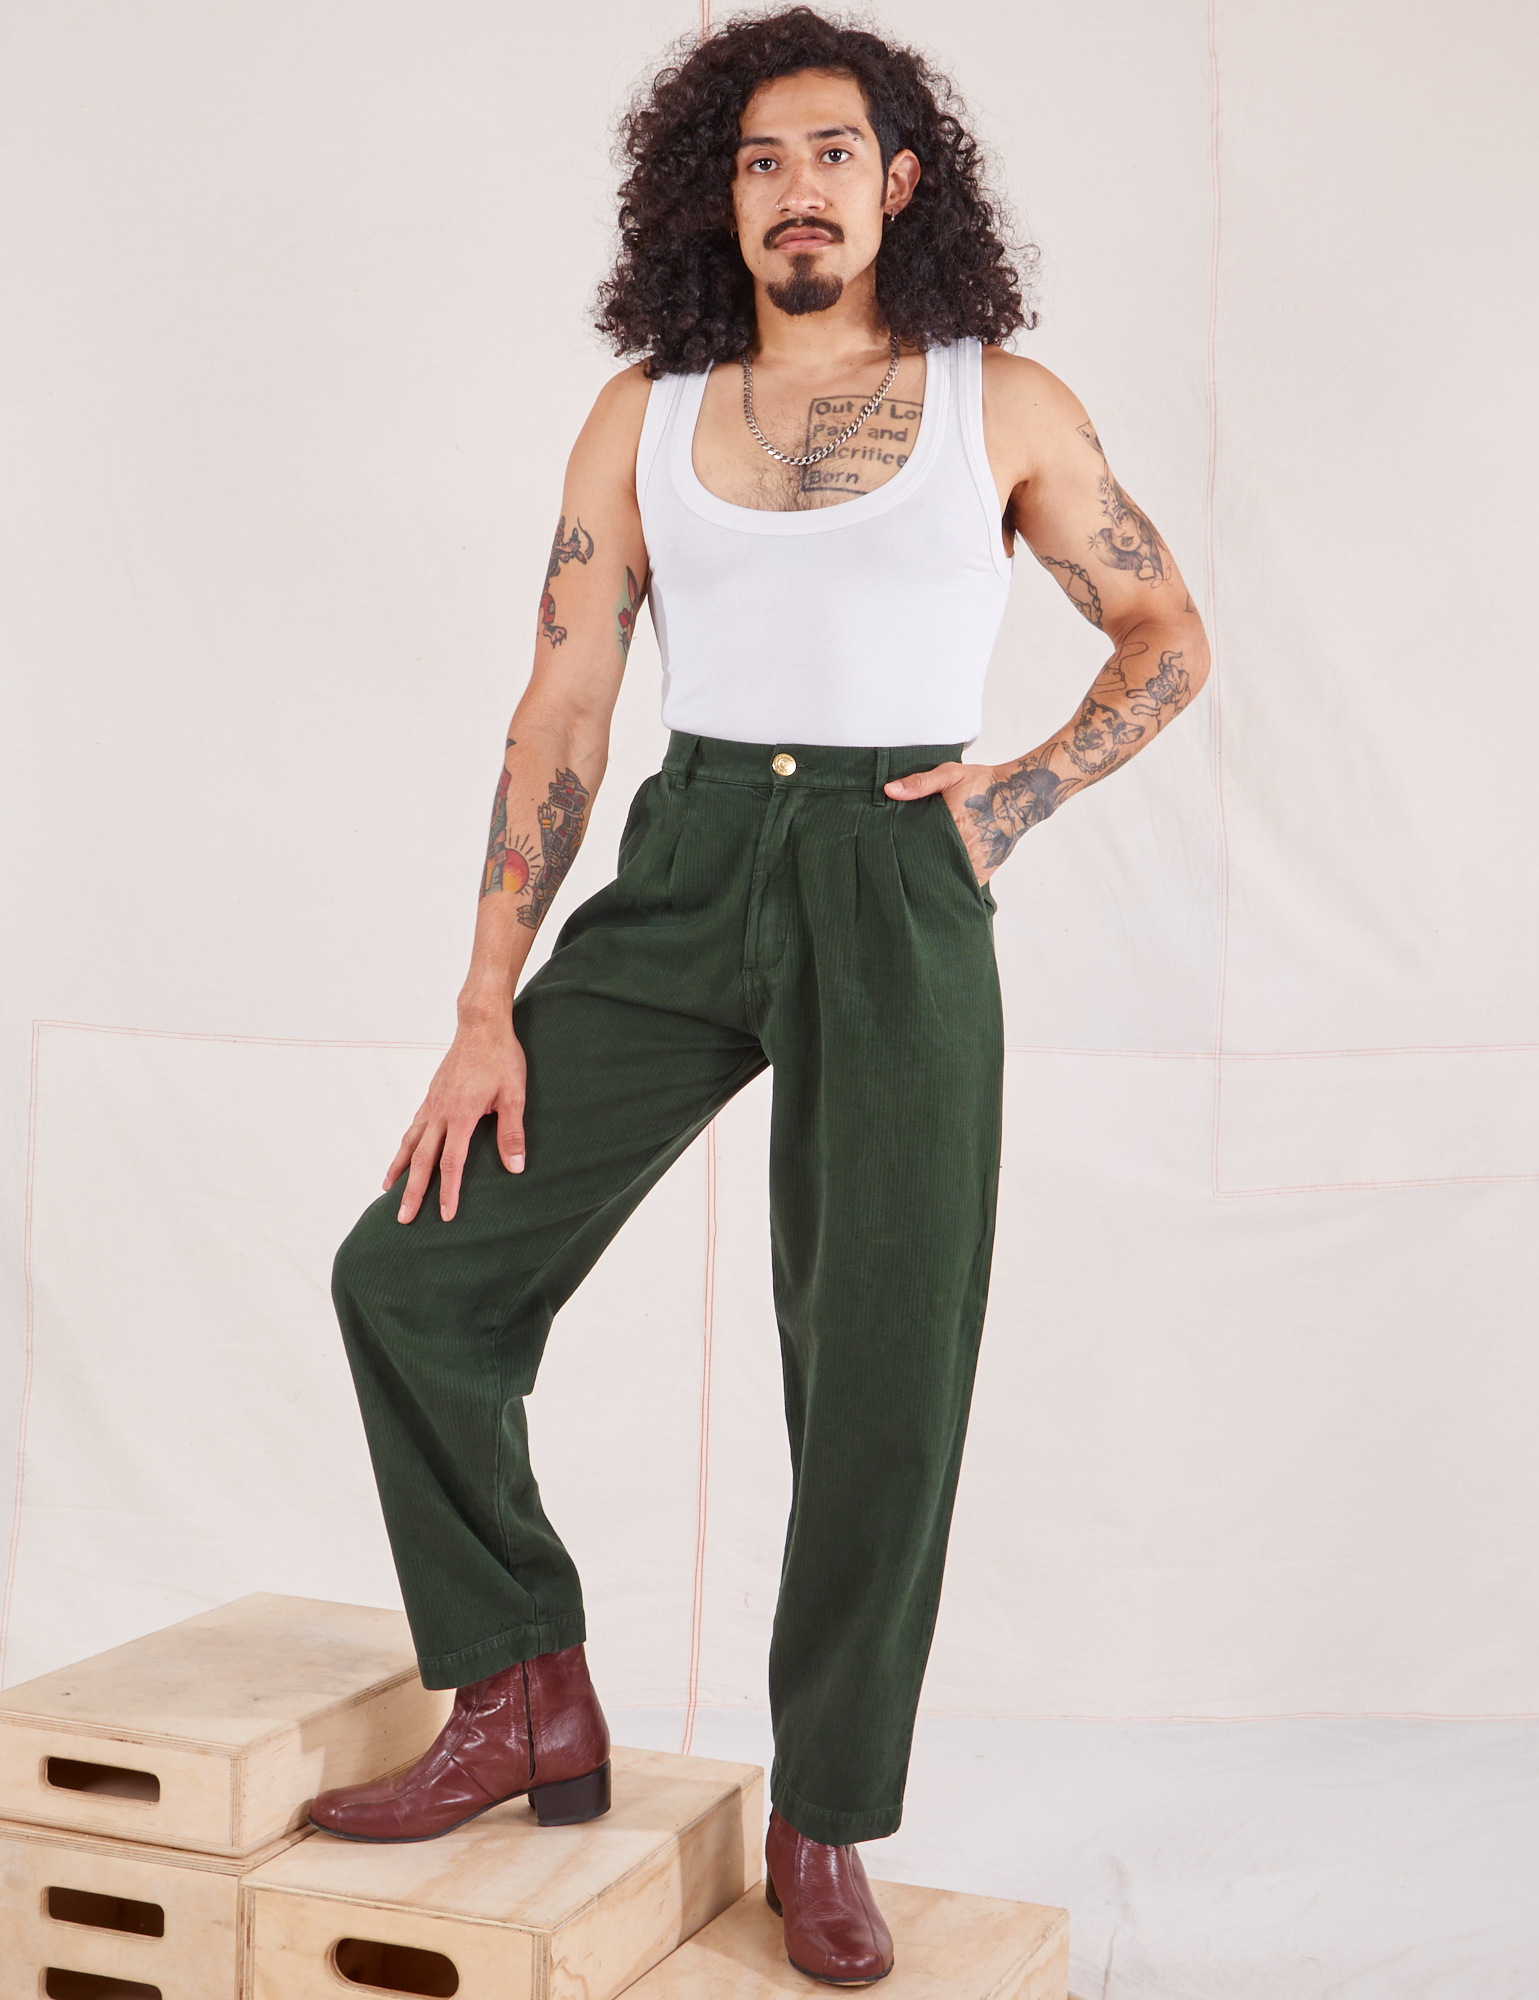 Jesse is 5&#39;8&quot; and wearing XS Heritage Trousers in Swamp Green paired with vintage off-white Cropped Tank Top